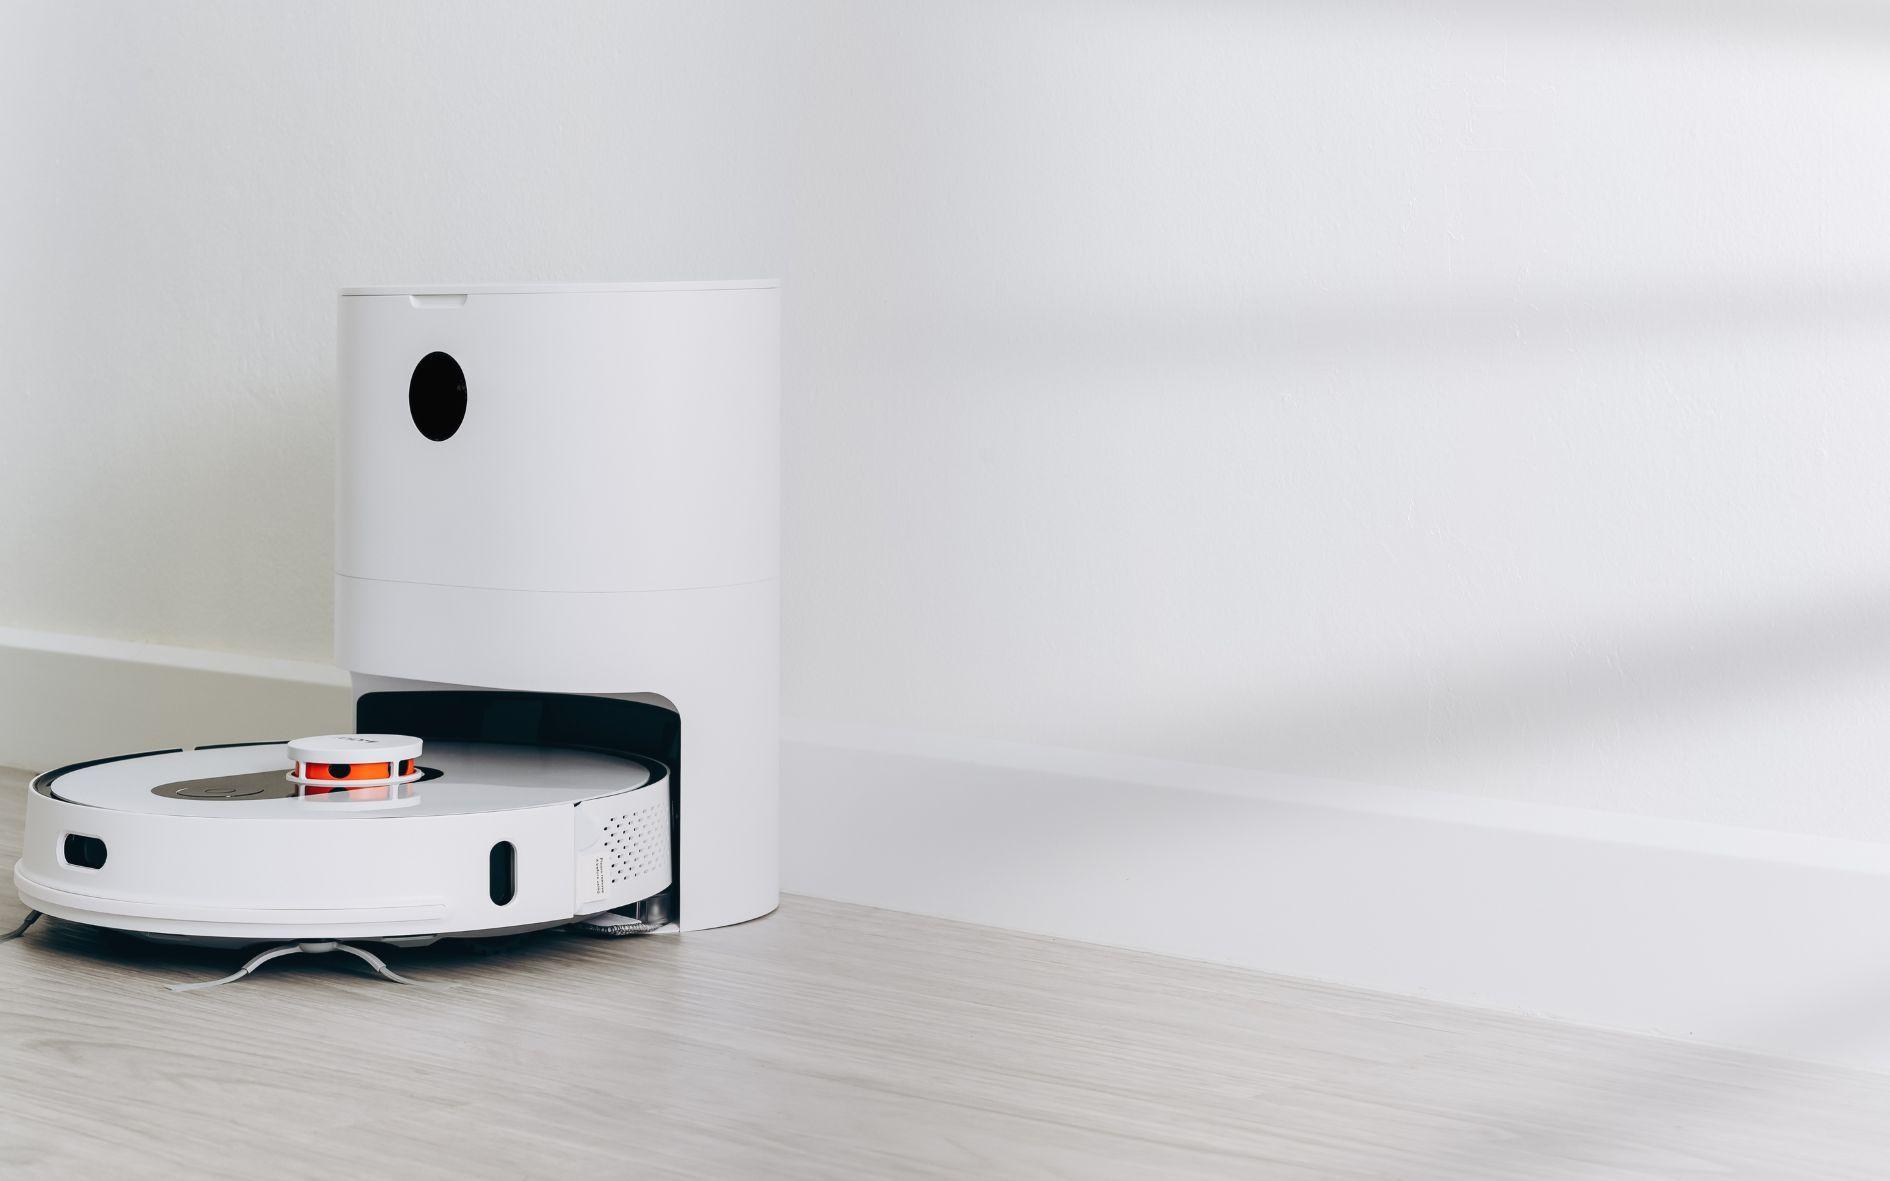 How Does the Co-Botic 1700 Compare to a Domestic Robotic Vacuum